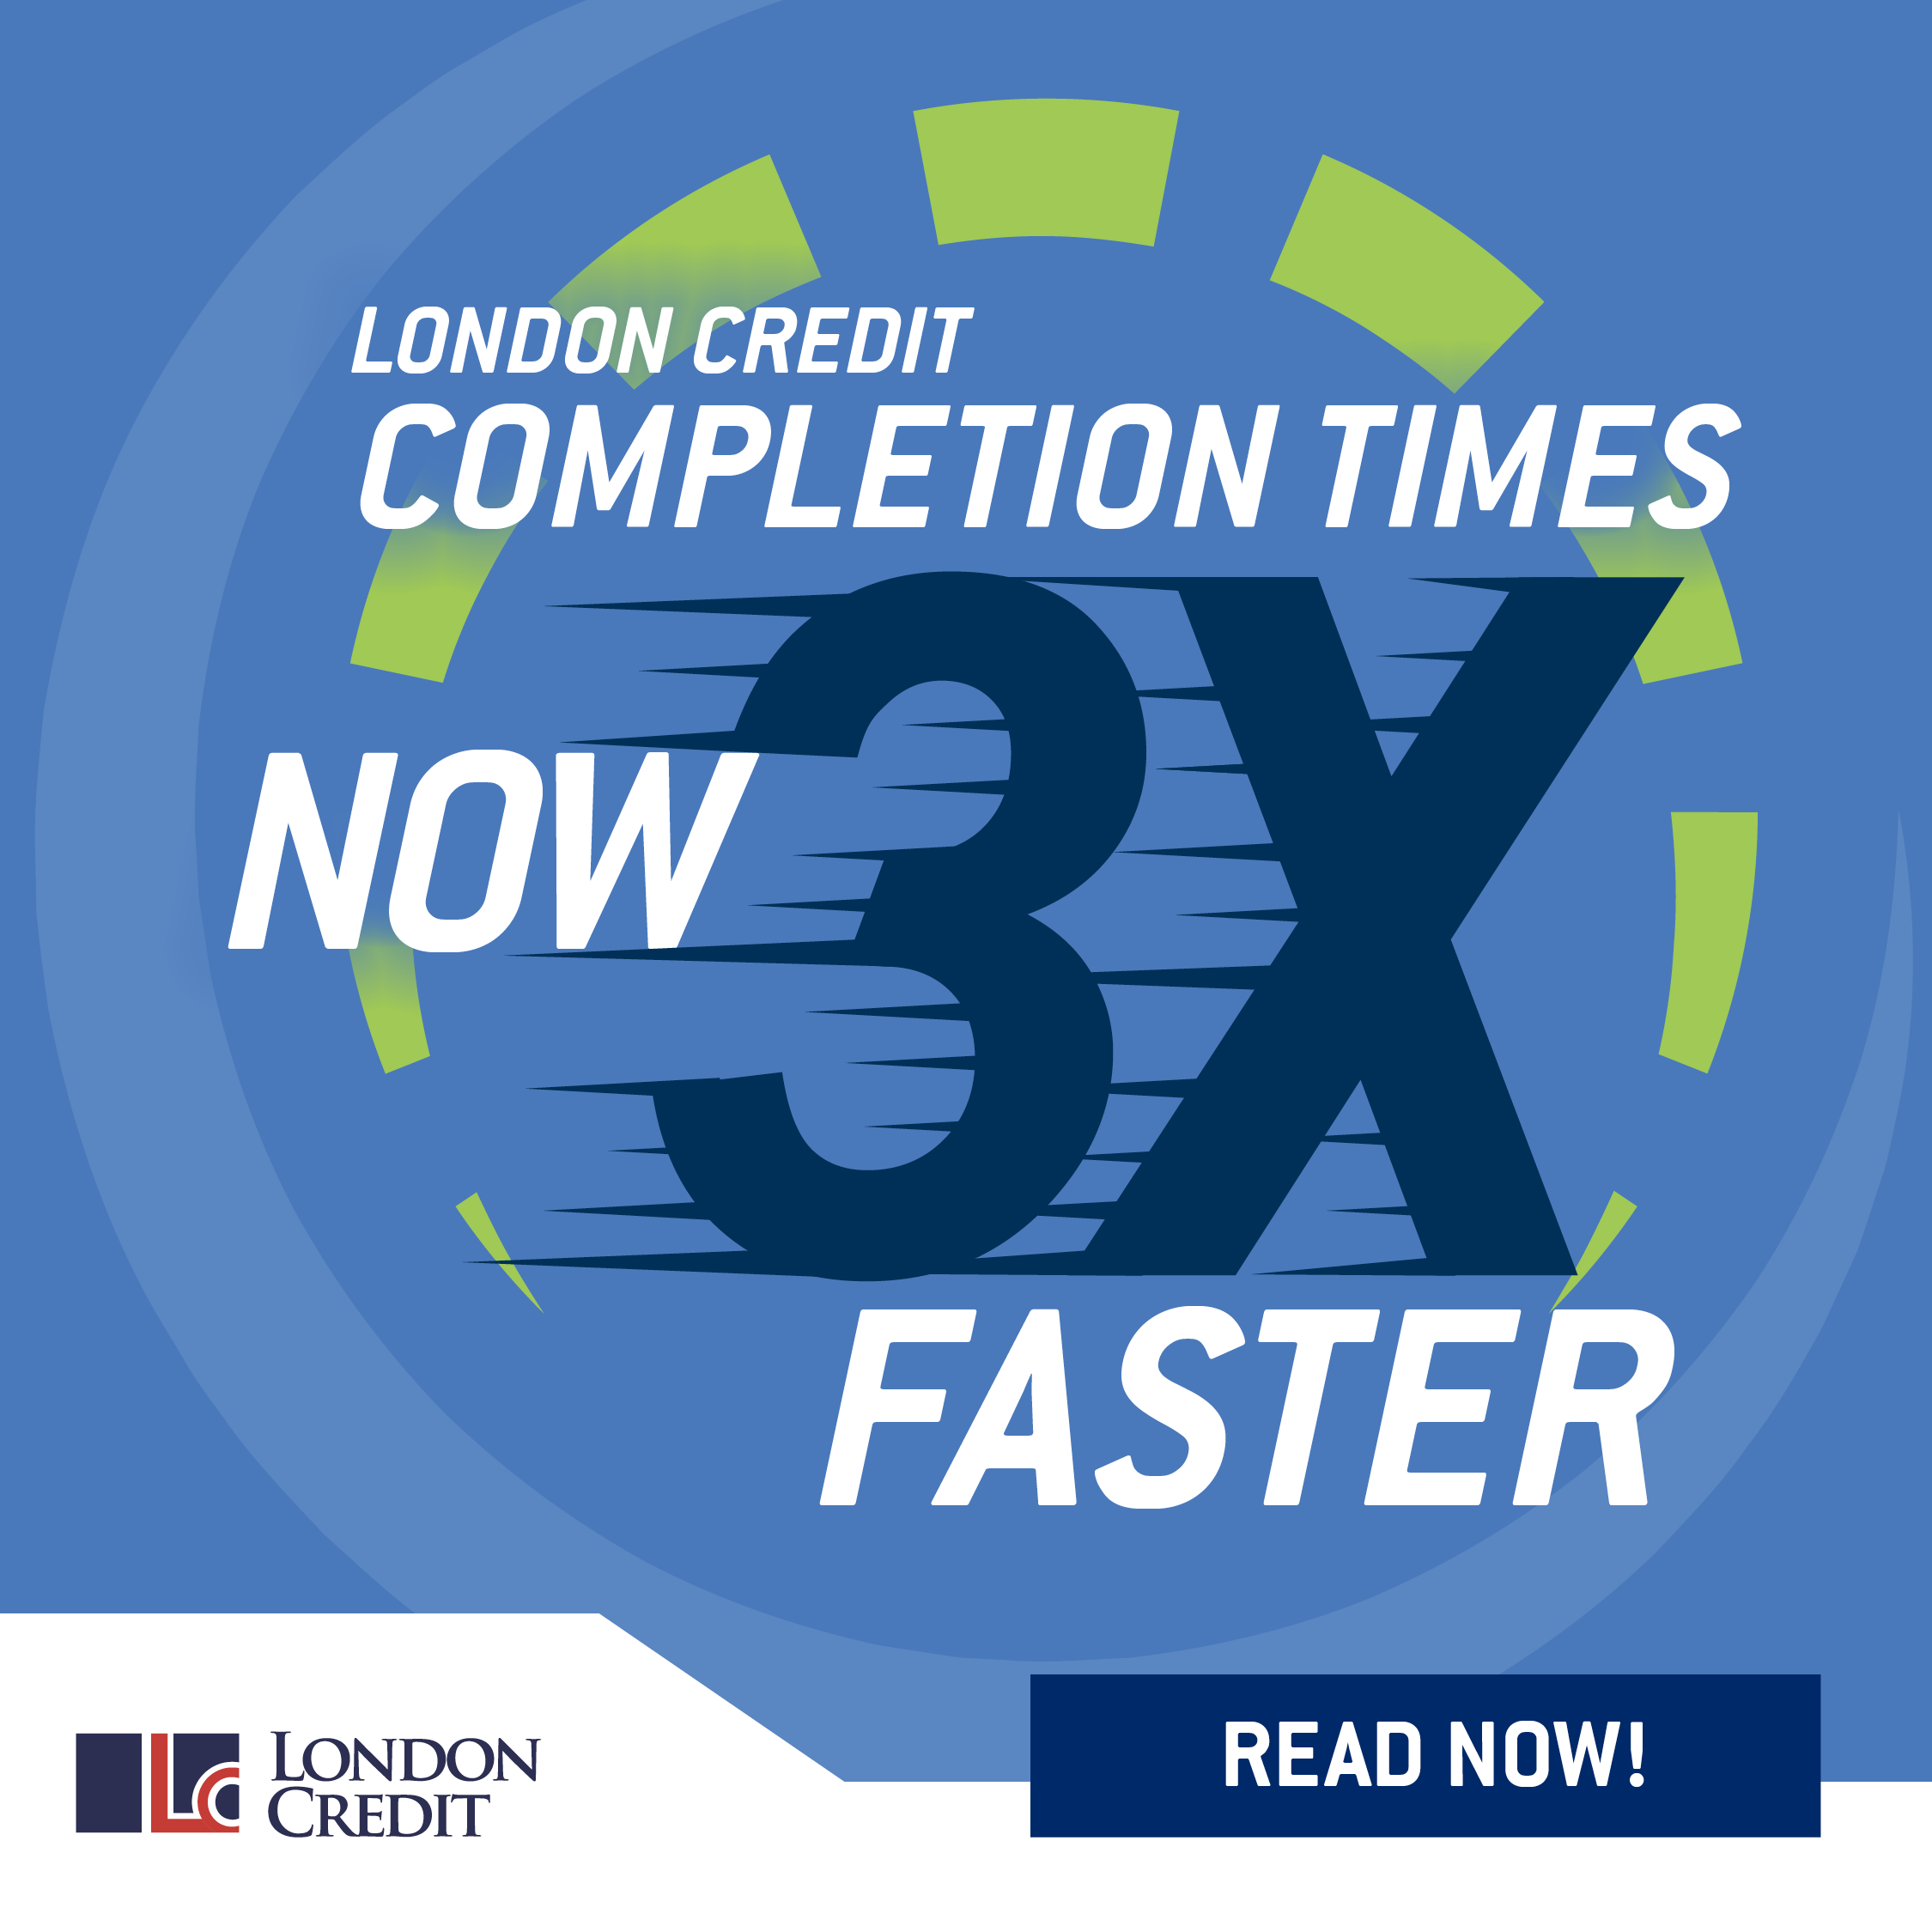 London Credit completion times now three times faster